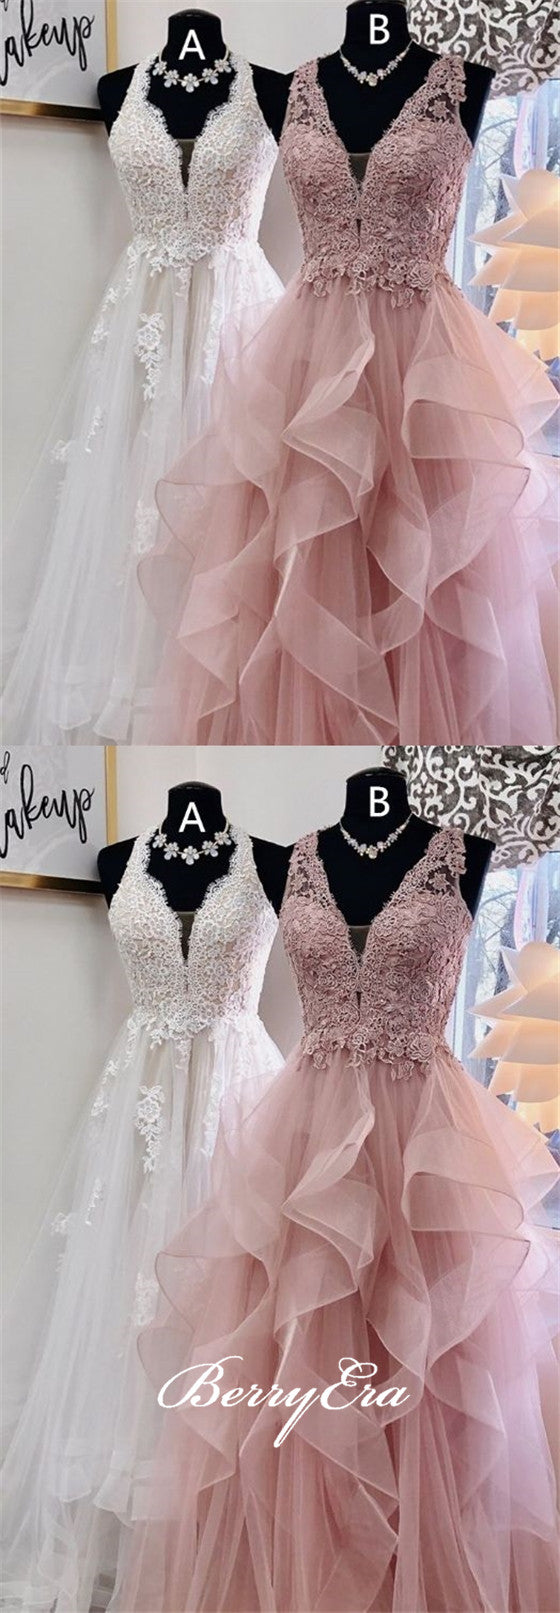 Gorgeous Lace Tulle Prom Dresses, Popular Prom Dresses, New Arrival Prom Dresses